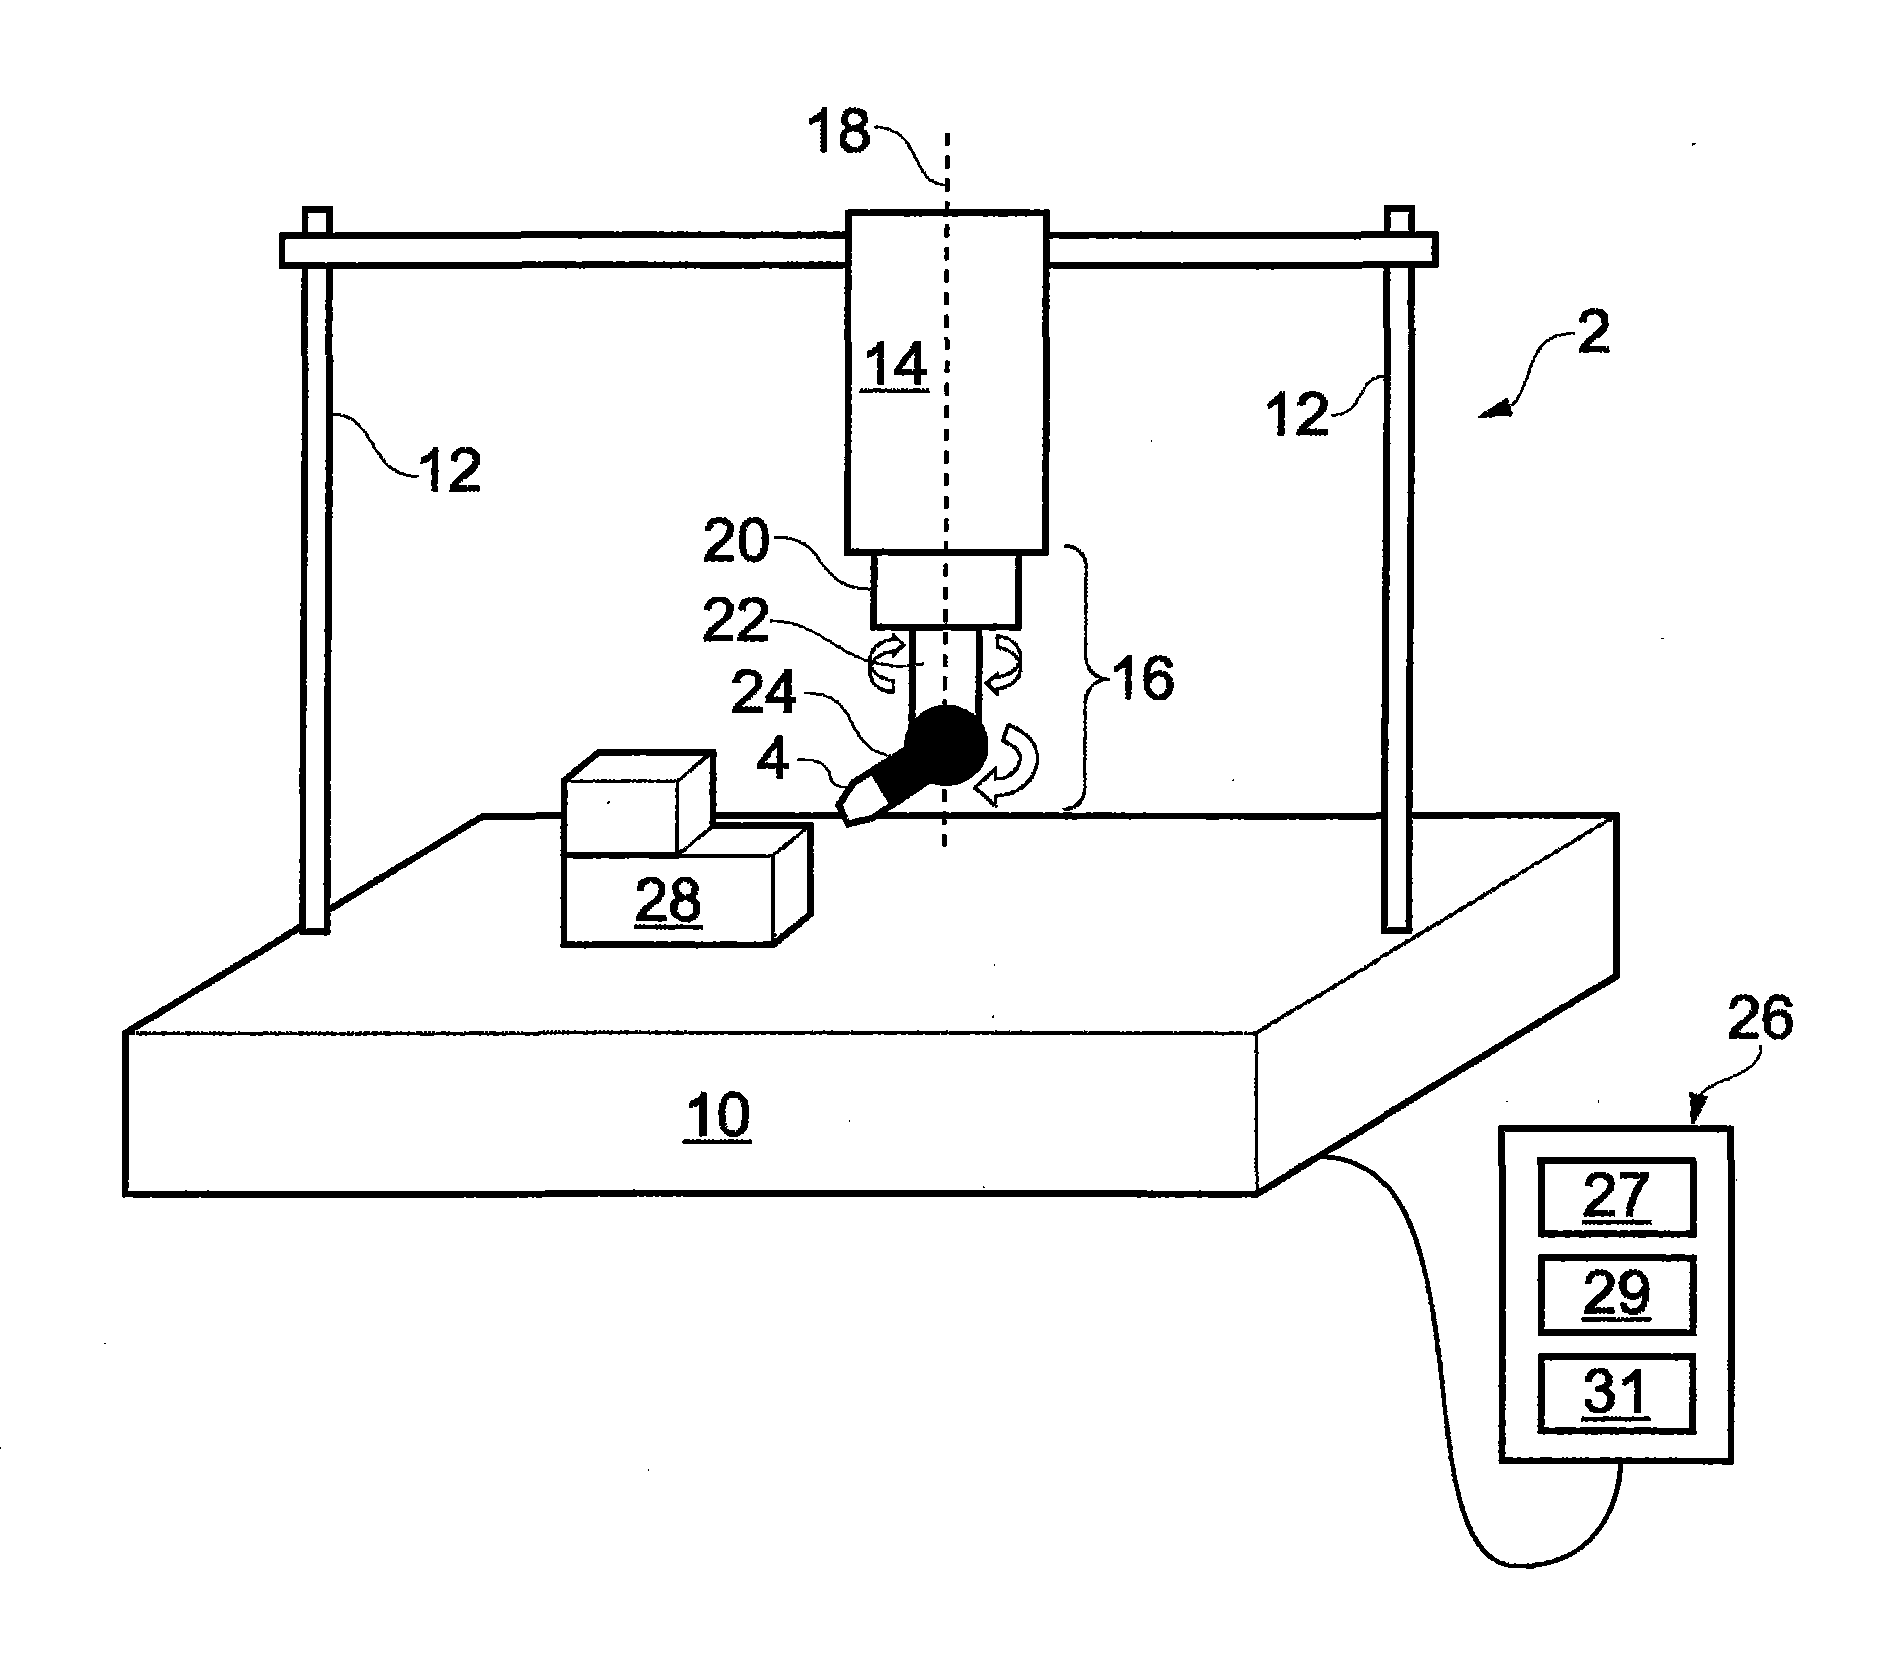 Non-contact measurement apparatus and method